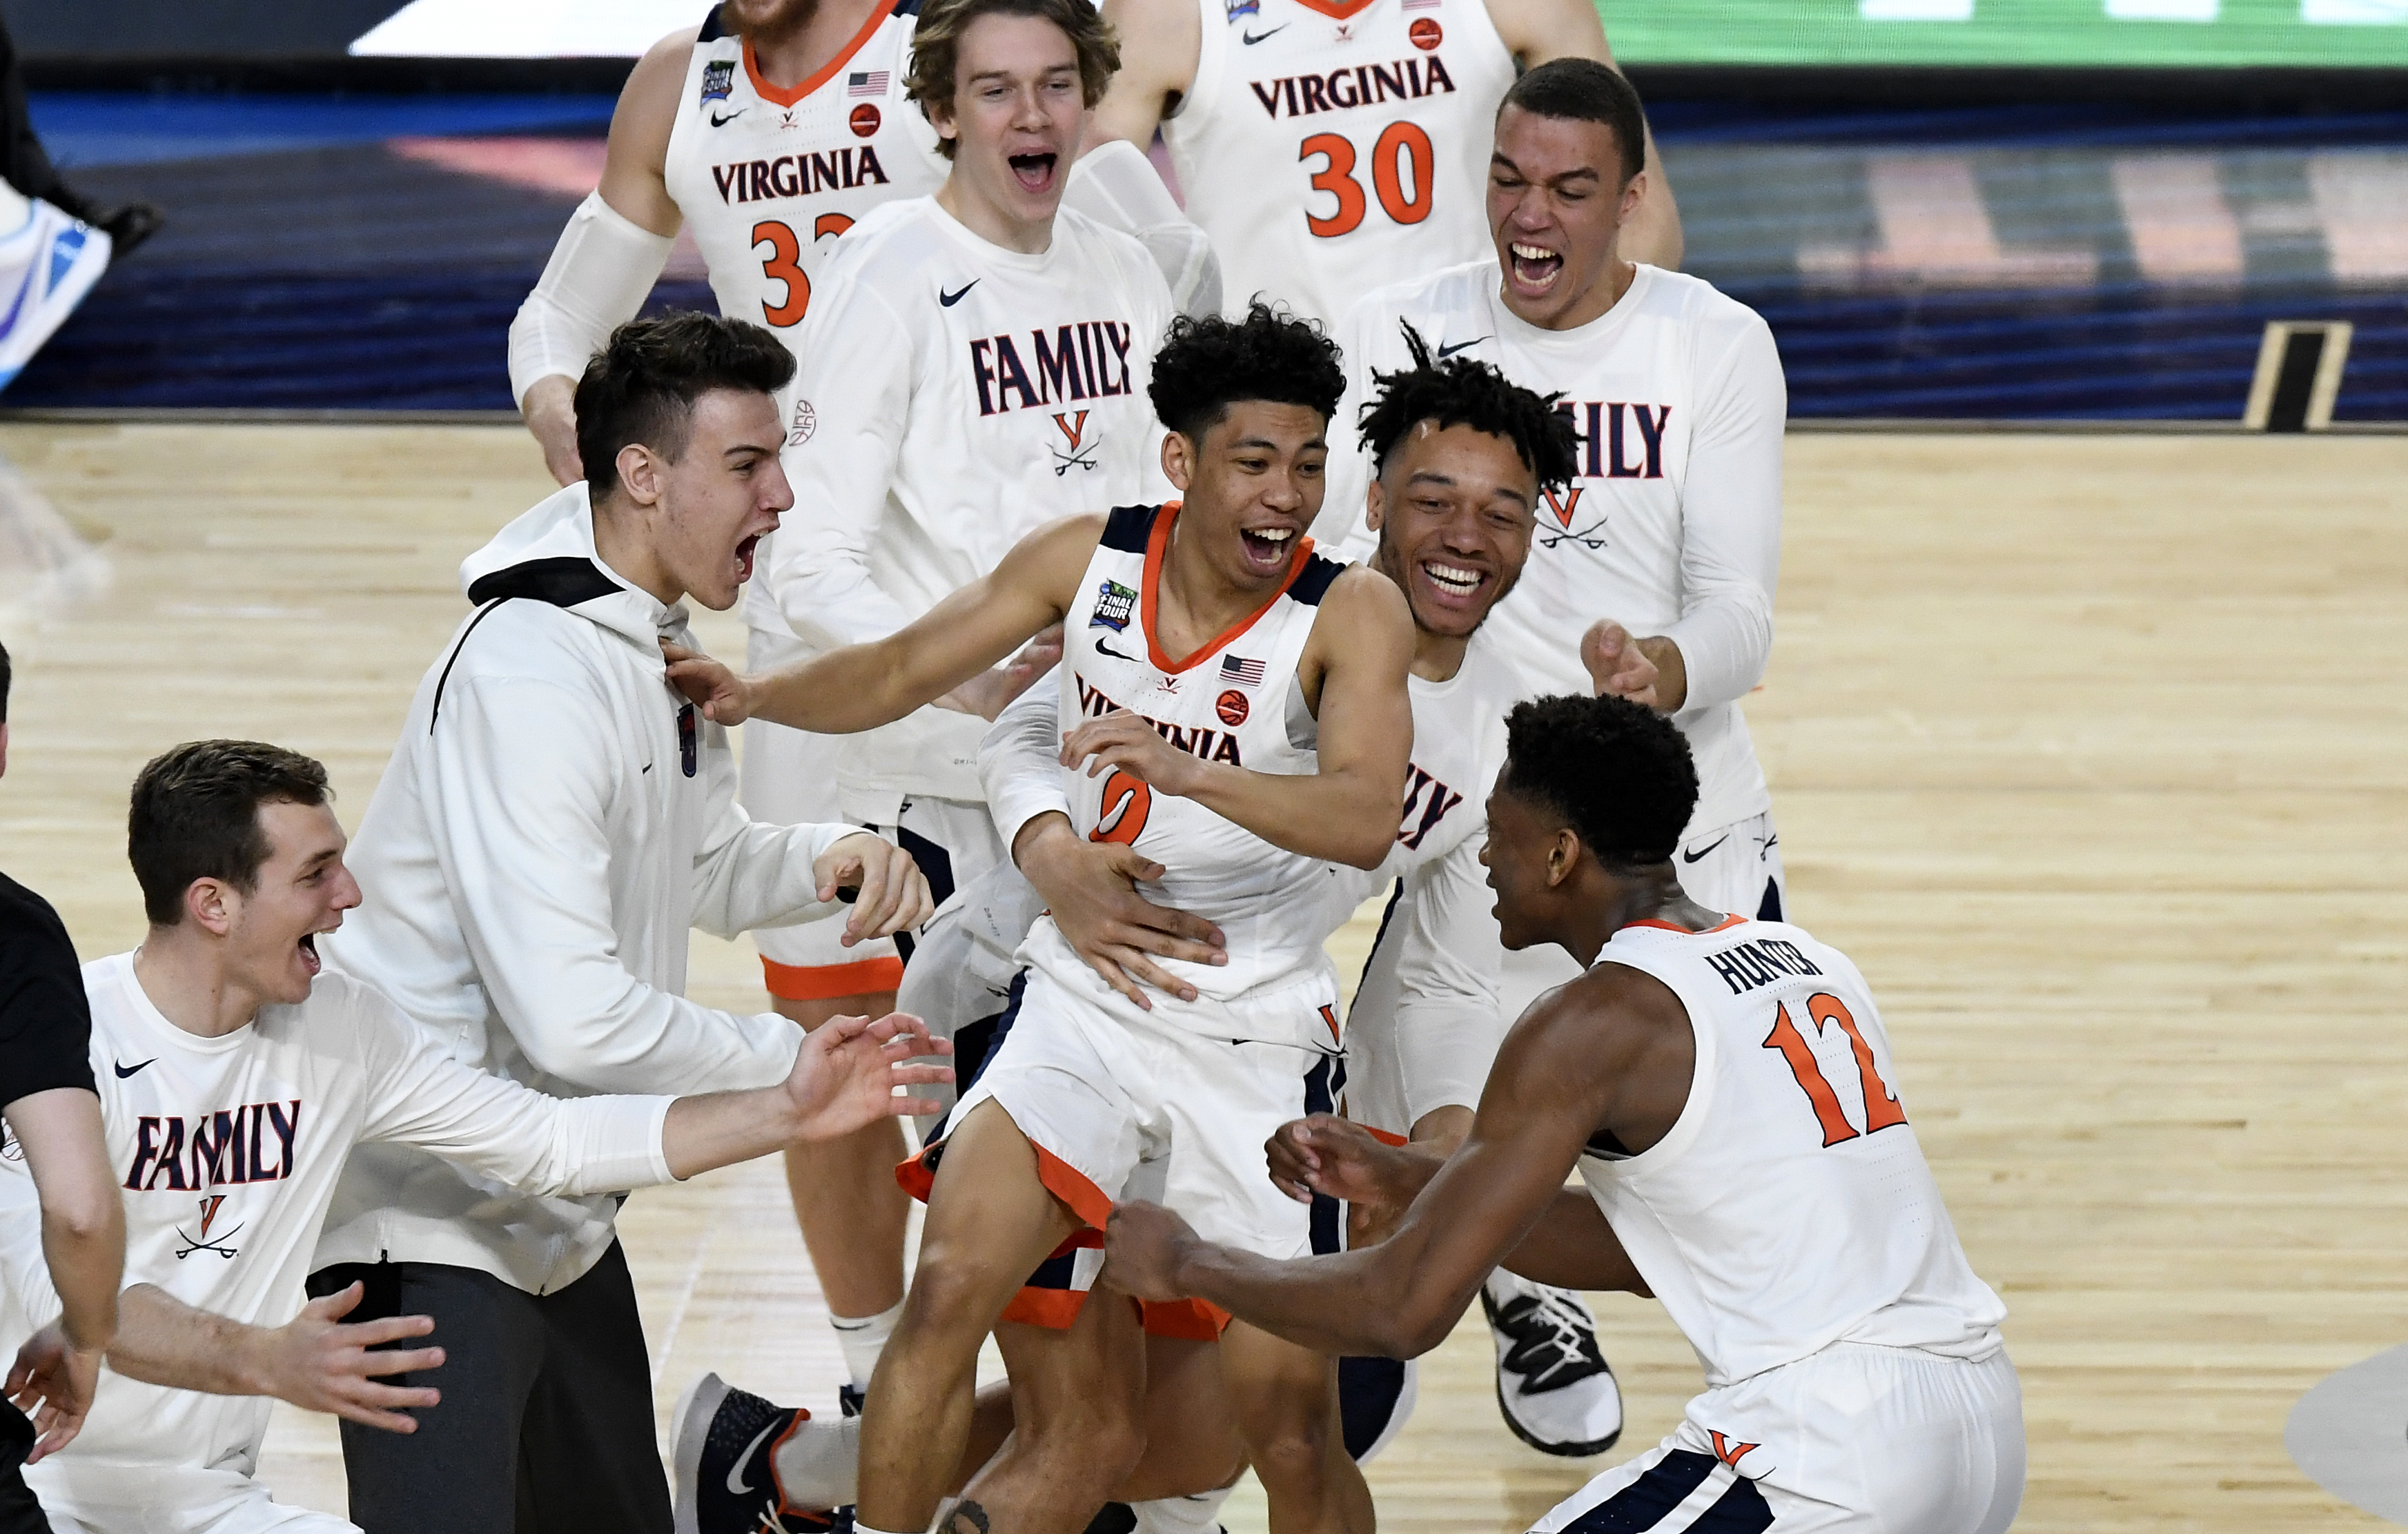 Highlight: Final Call as Virginia wins National Championship with 85-77 overtime victory over Texas Tech